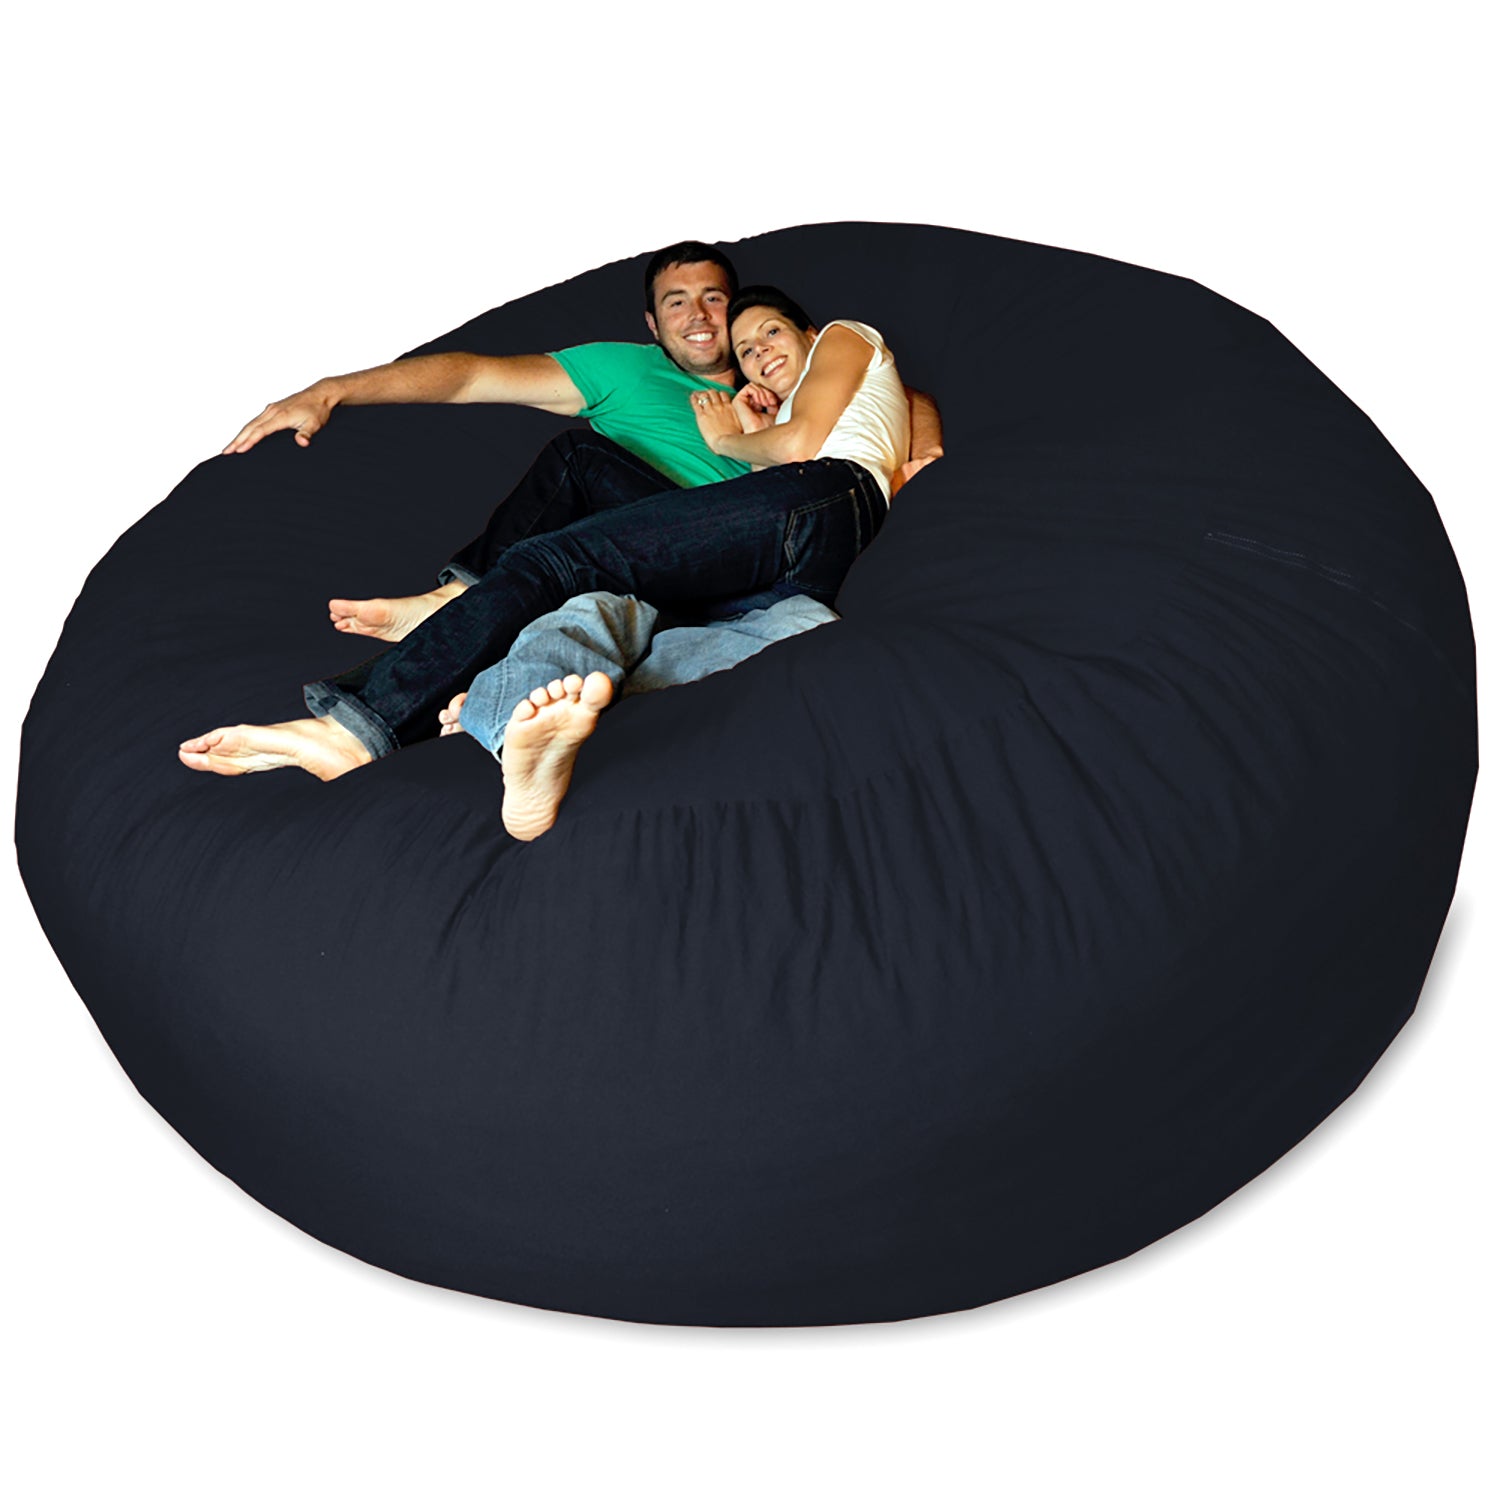 Lively Absorb precocious Theater Sacks 8' Huge Bean Bag Chair - Navy Blue